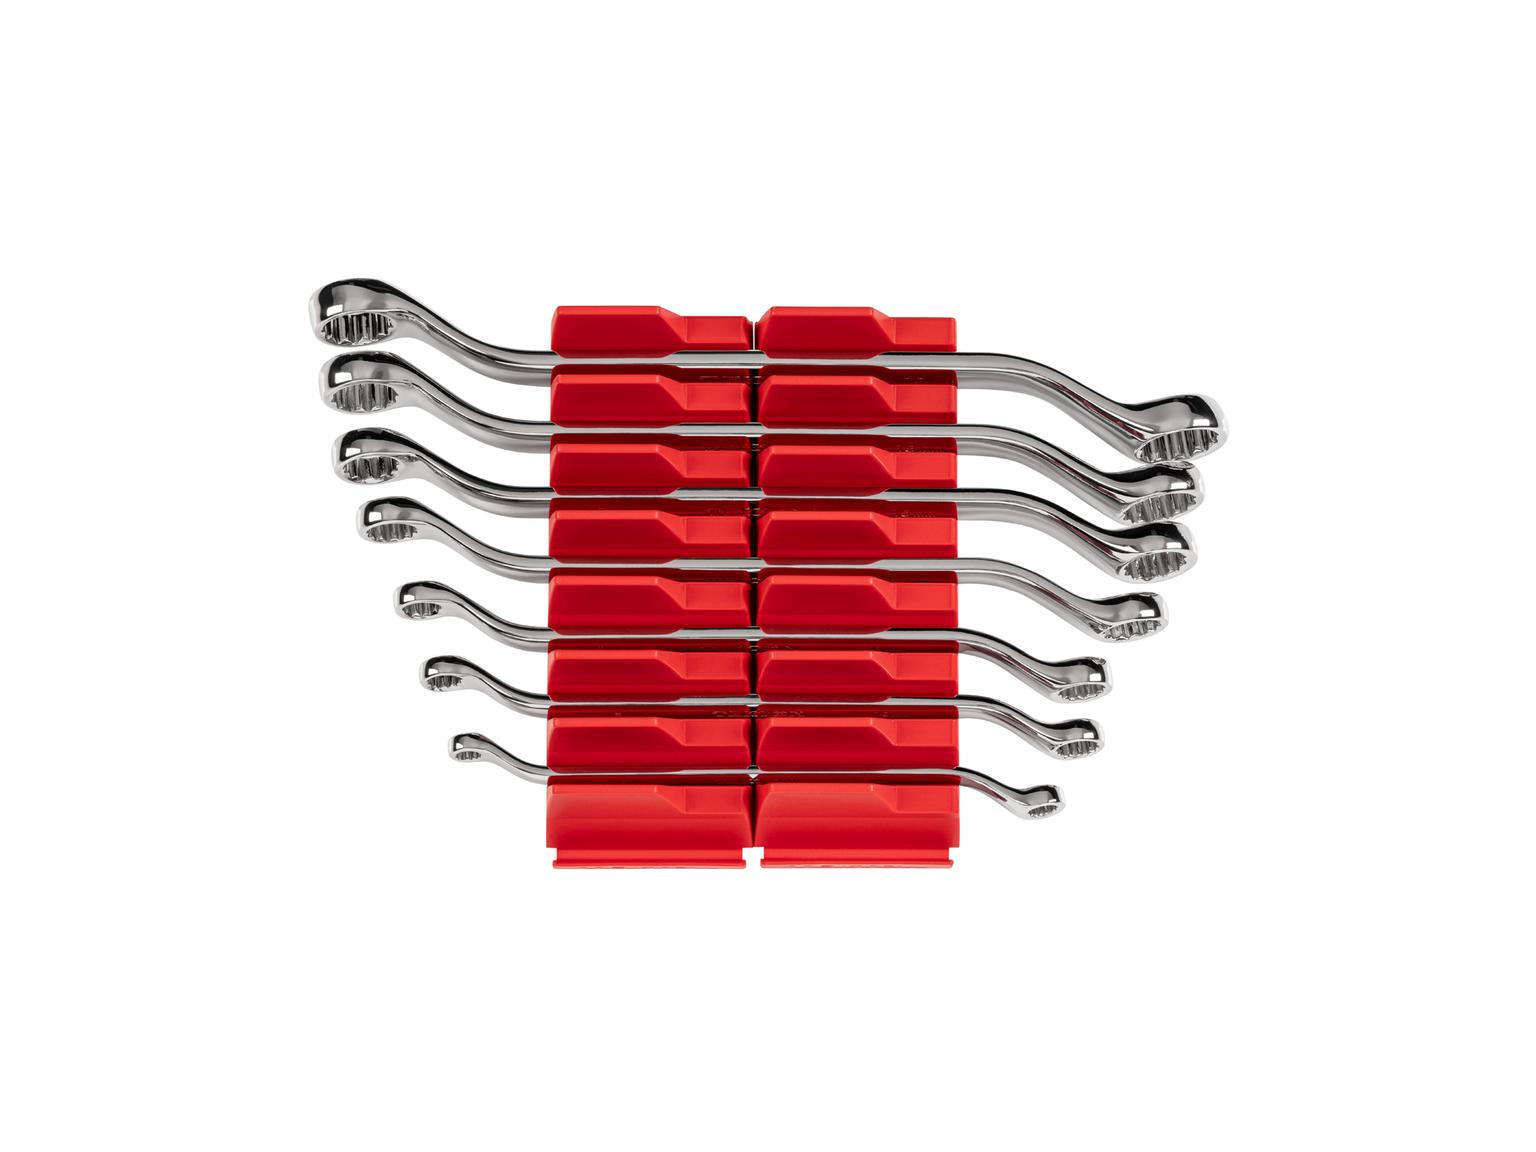 TEKTON WBE95201-T 45-Degree Offset Box End Wrench Set with Modular Slotted Organizer, 7-Piece (6-19 mm)